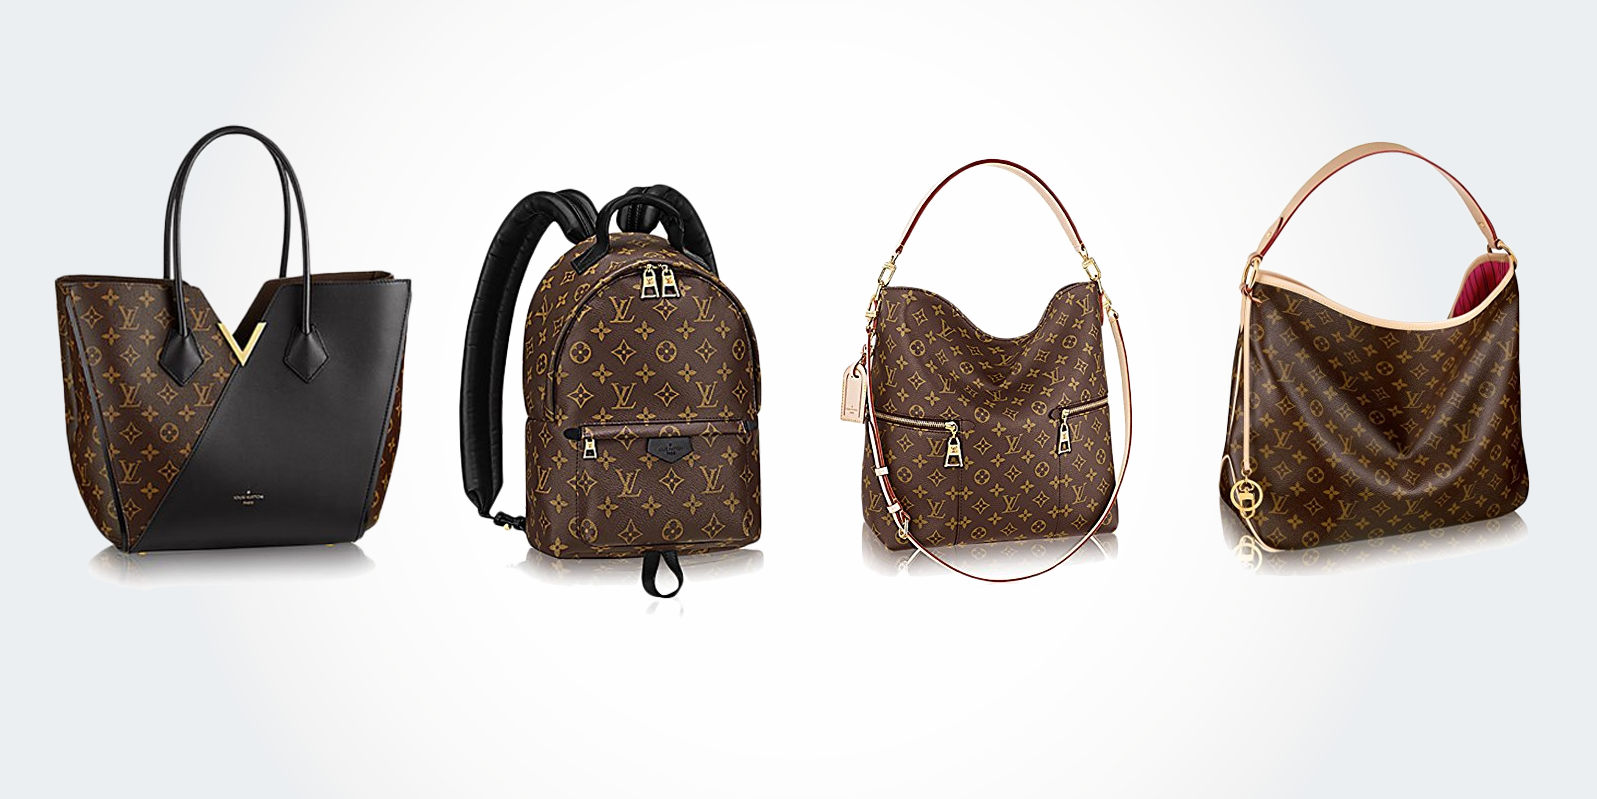 Where To Buy Louis Vuitton Purses | Confederated Tribes of the Umatilla Indian Reservation